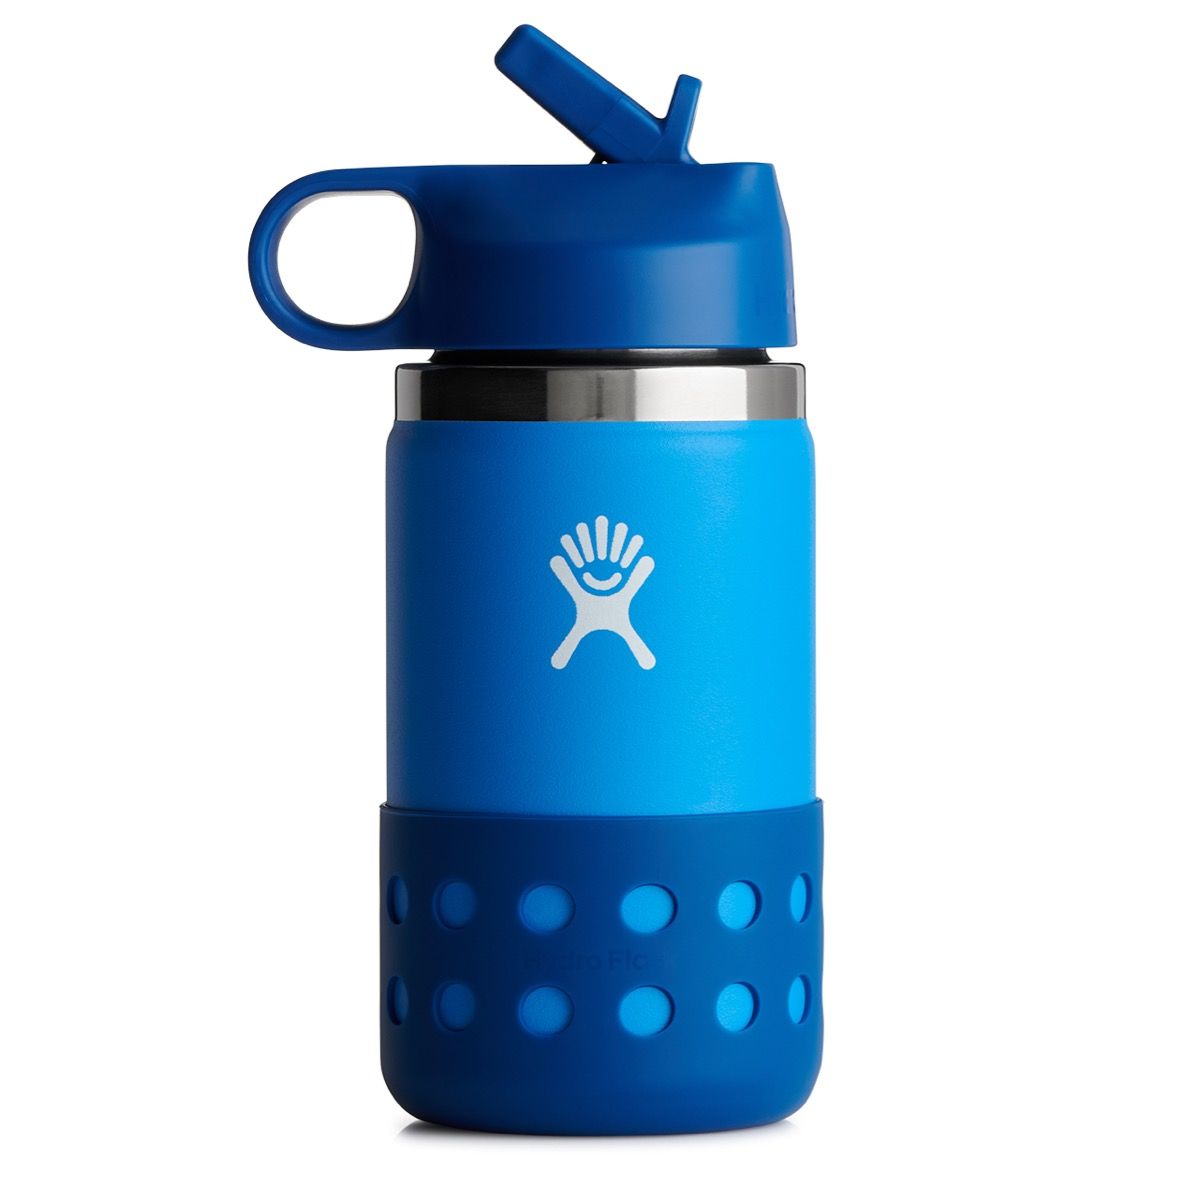 12 oz. Kids Wide Mouth from Hydro Flask, Insulated Bottles